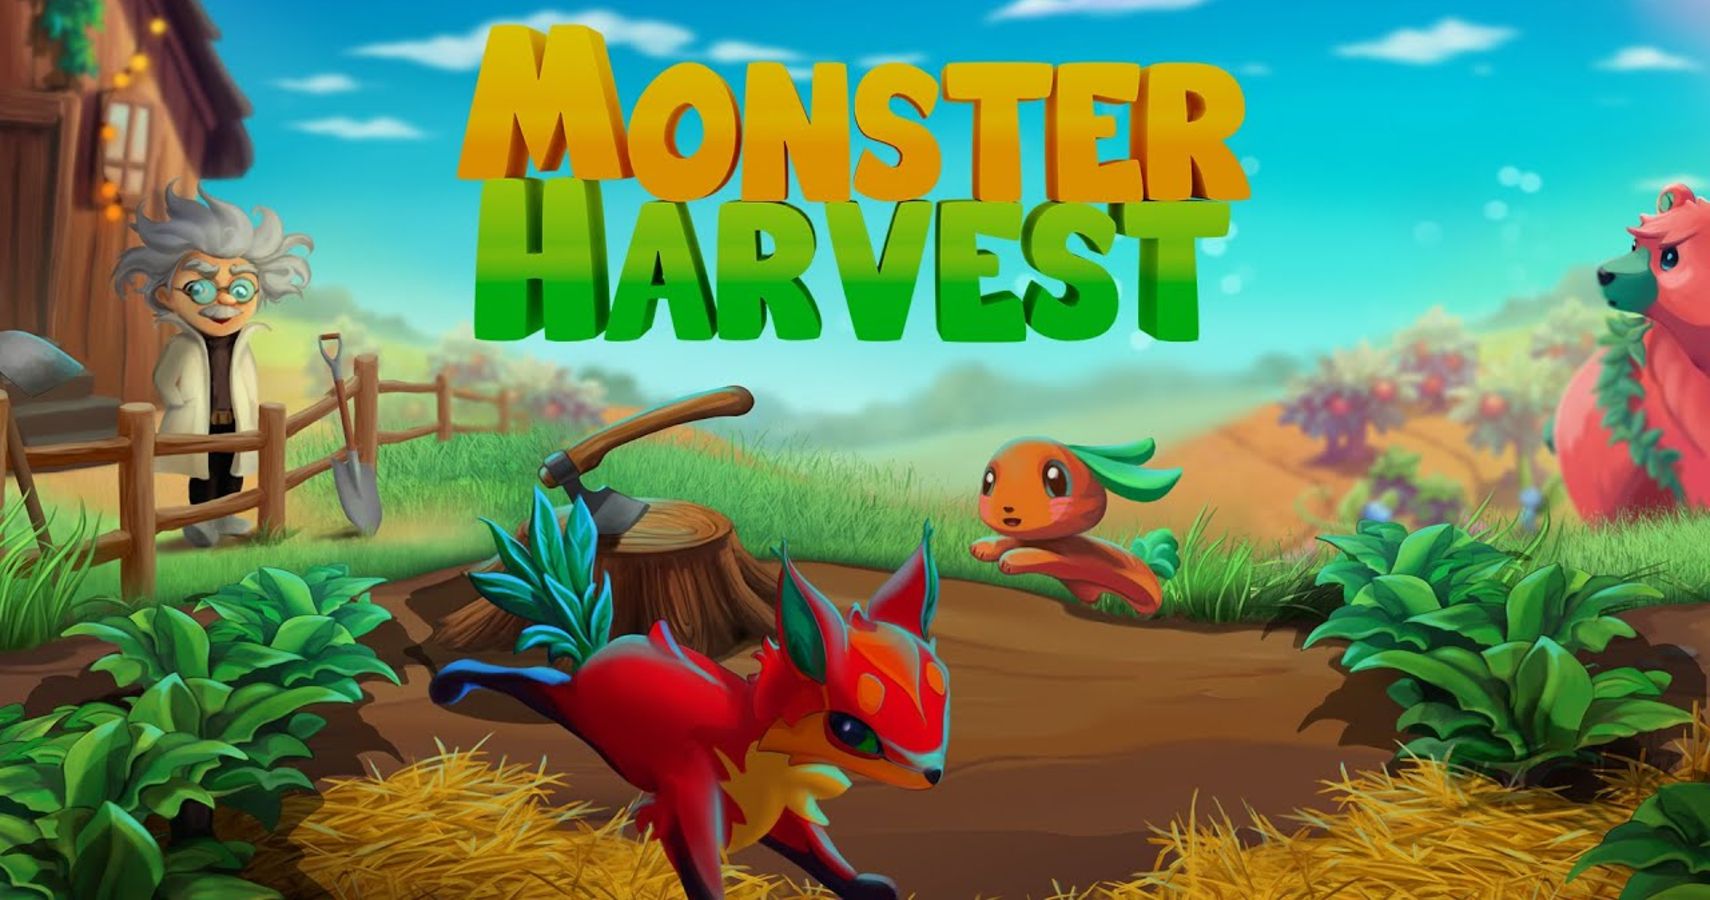 Title Screen for the new game Monster Harvest